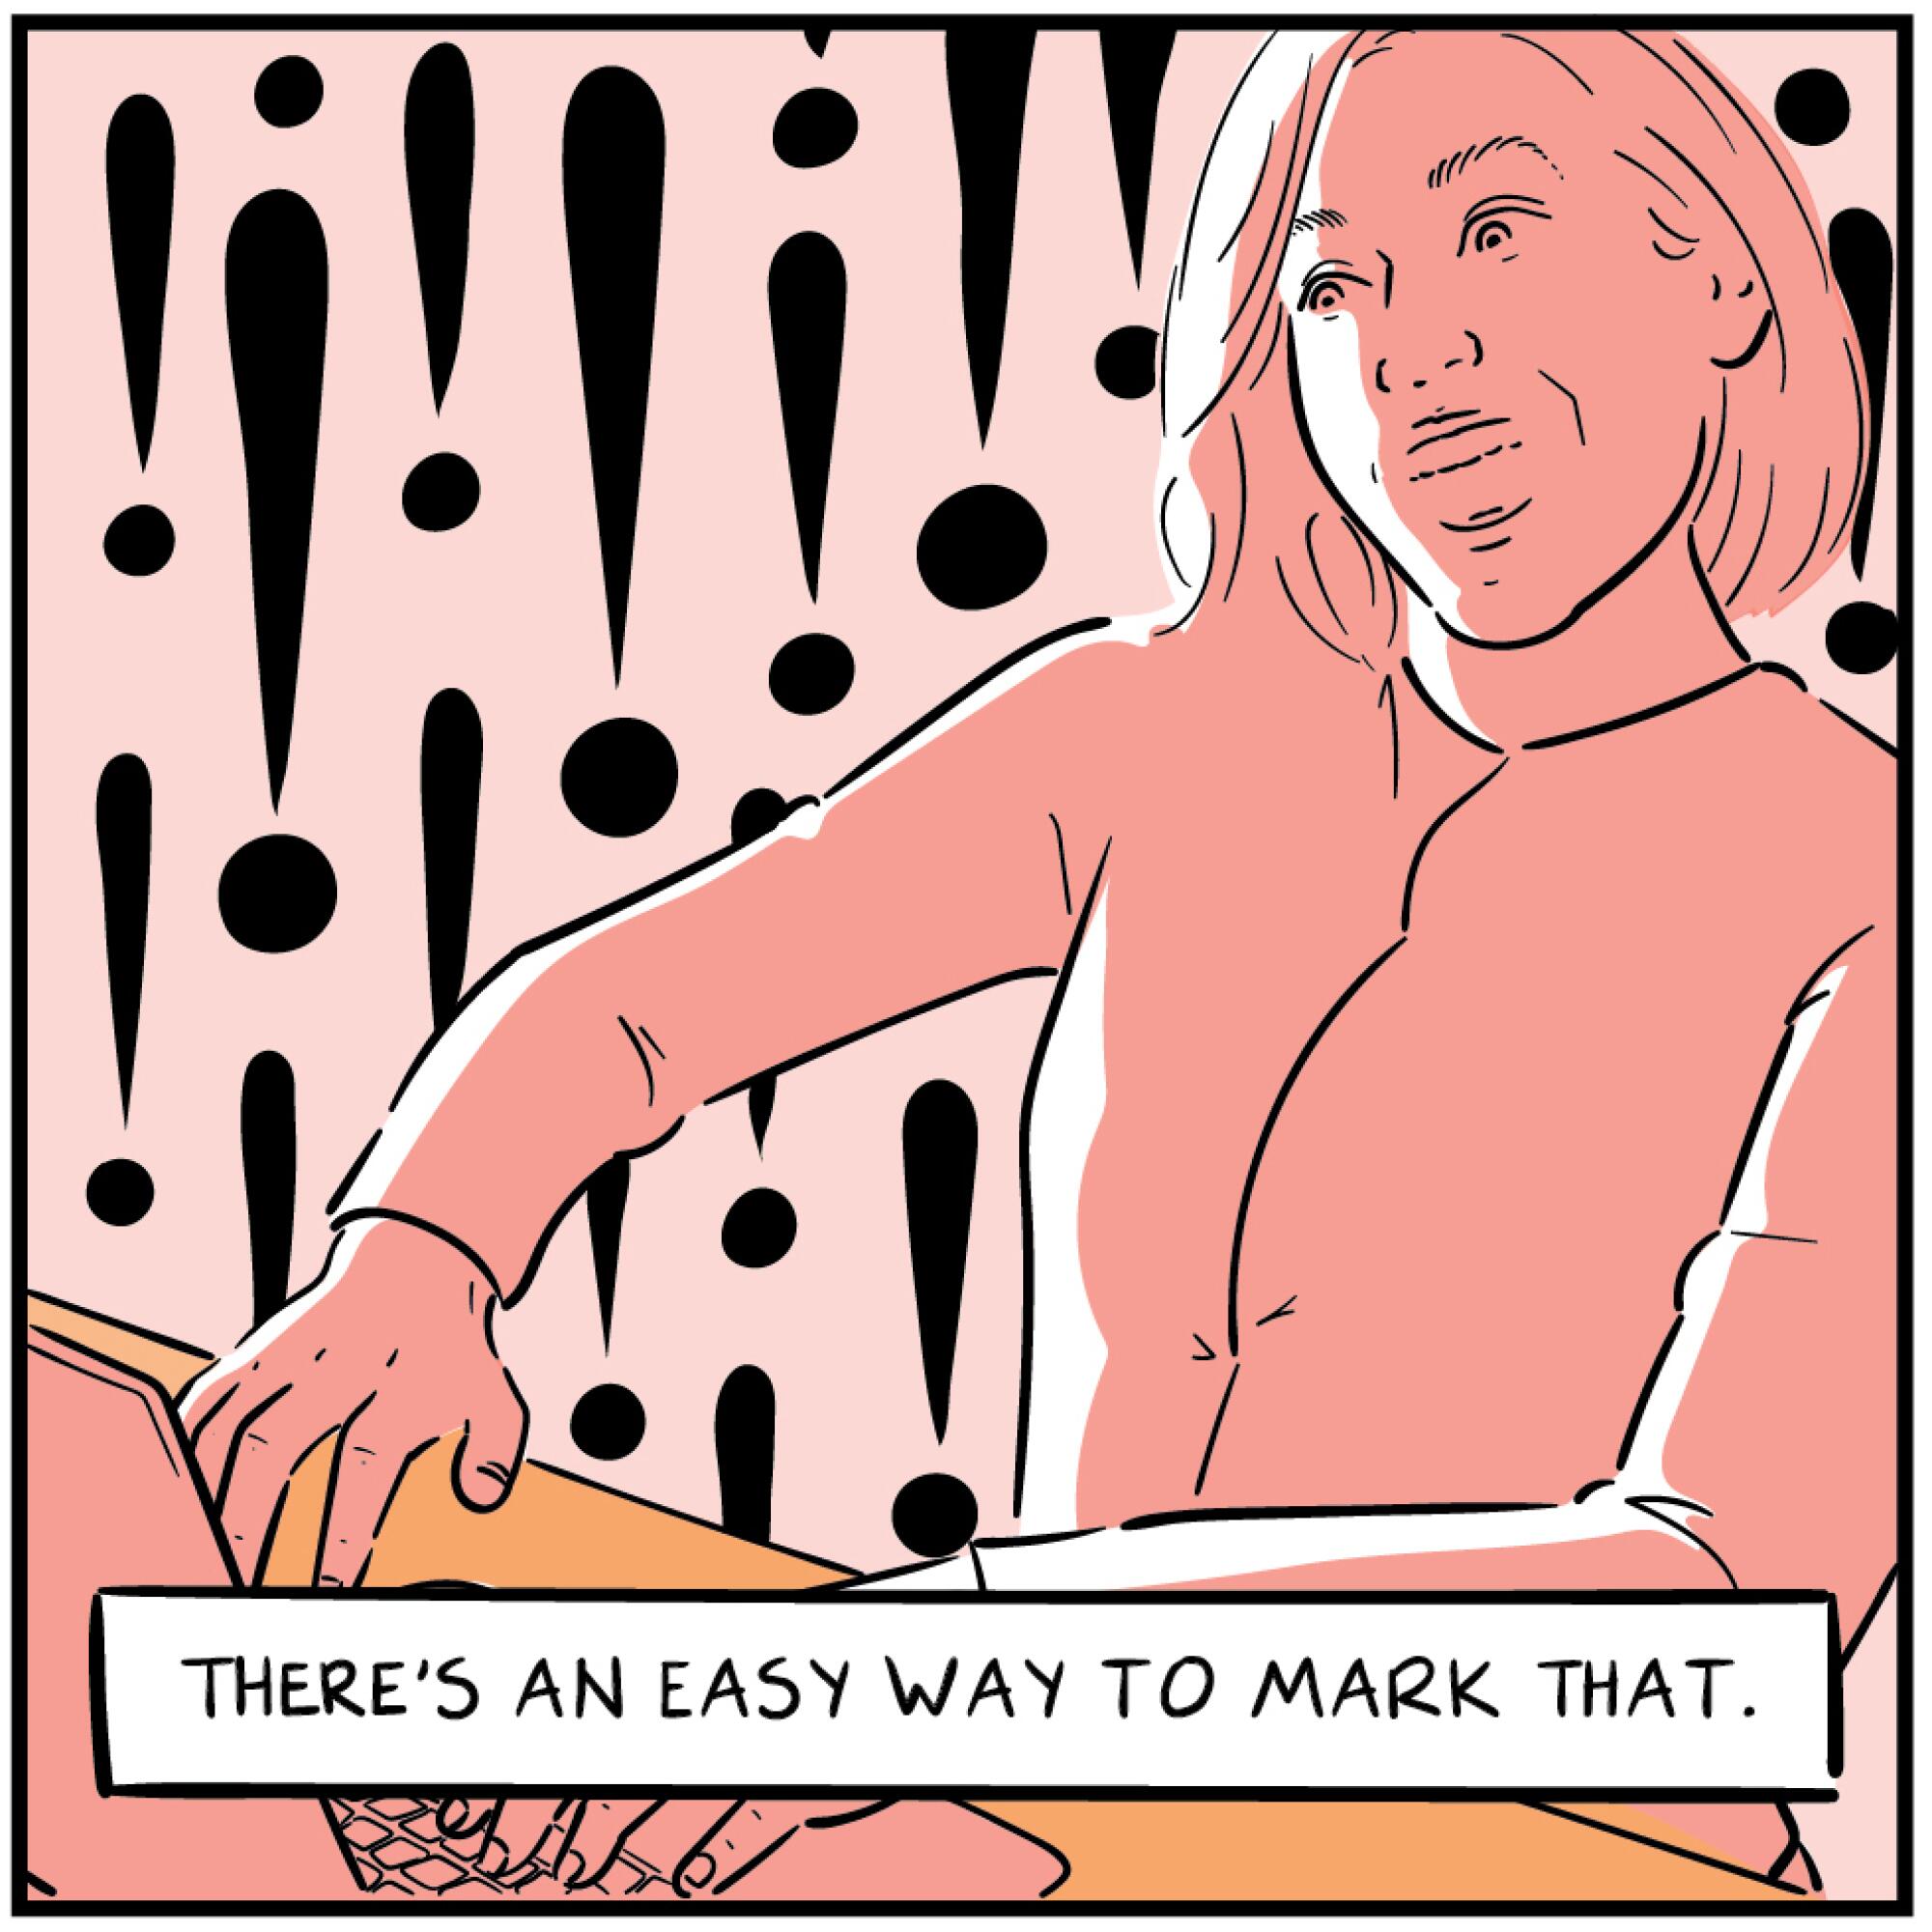 Comic panel of a woman typing enthusiastically with exclamation points in the background